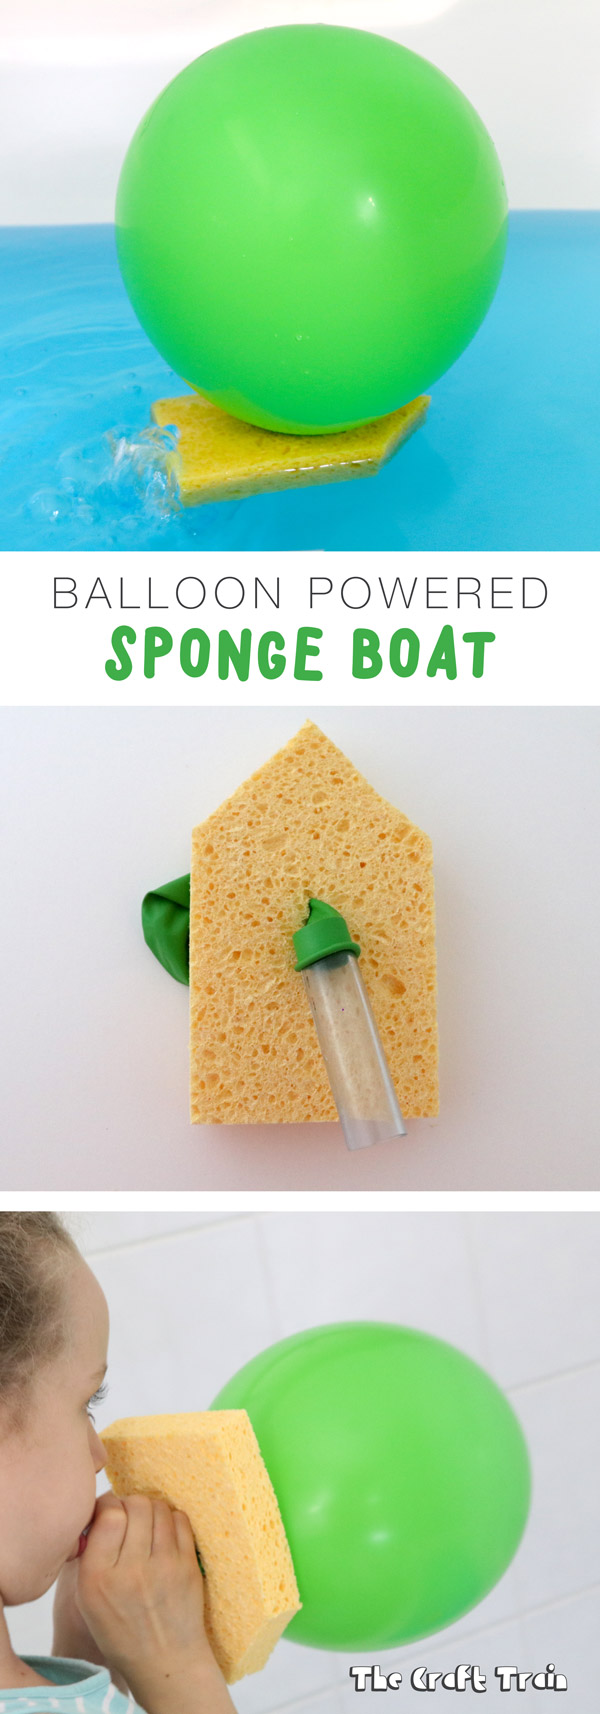 Make a balloon powered boat using a sponge. This is a fantastic STEAM craft that kids will love.